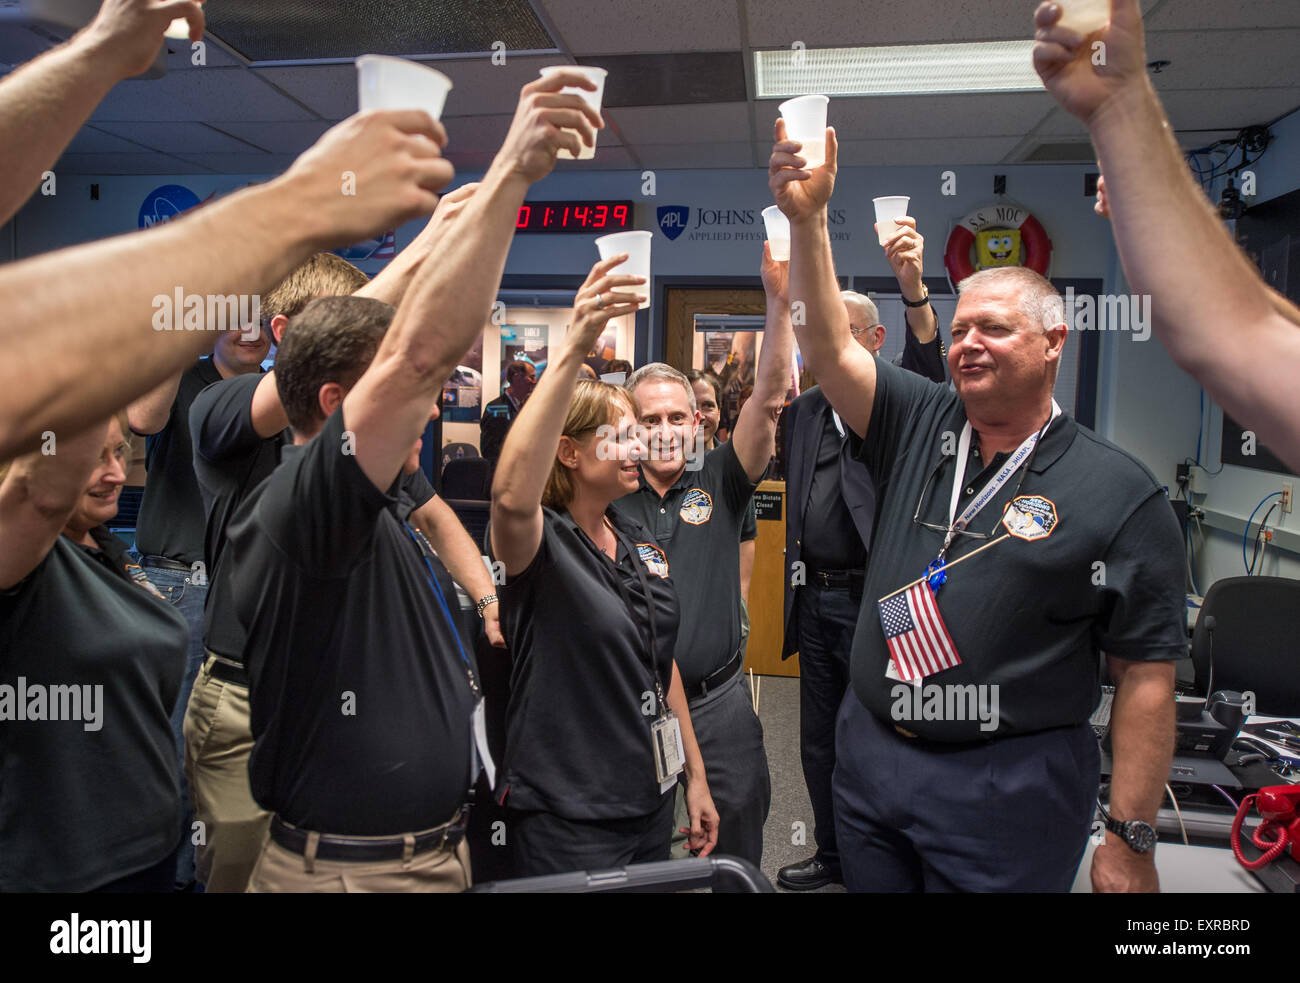 Members of the New Horizons team celebrate after confirming the spacecraft successfully completed the flyby of Pluto at the Johns Hopkins University Applied Physics Laboratory July 14, 2015 in Laurel, Maryland. Stock Photo